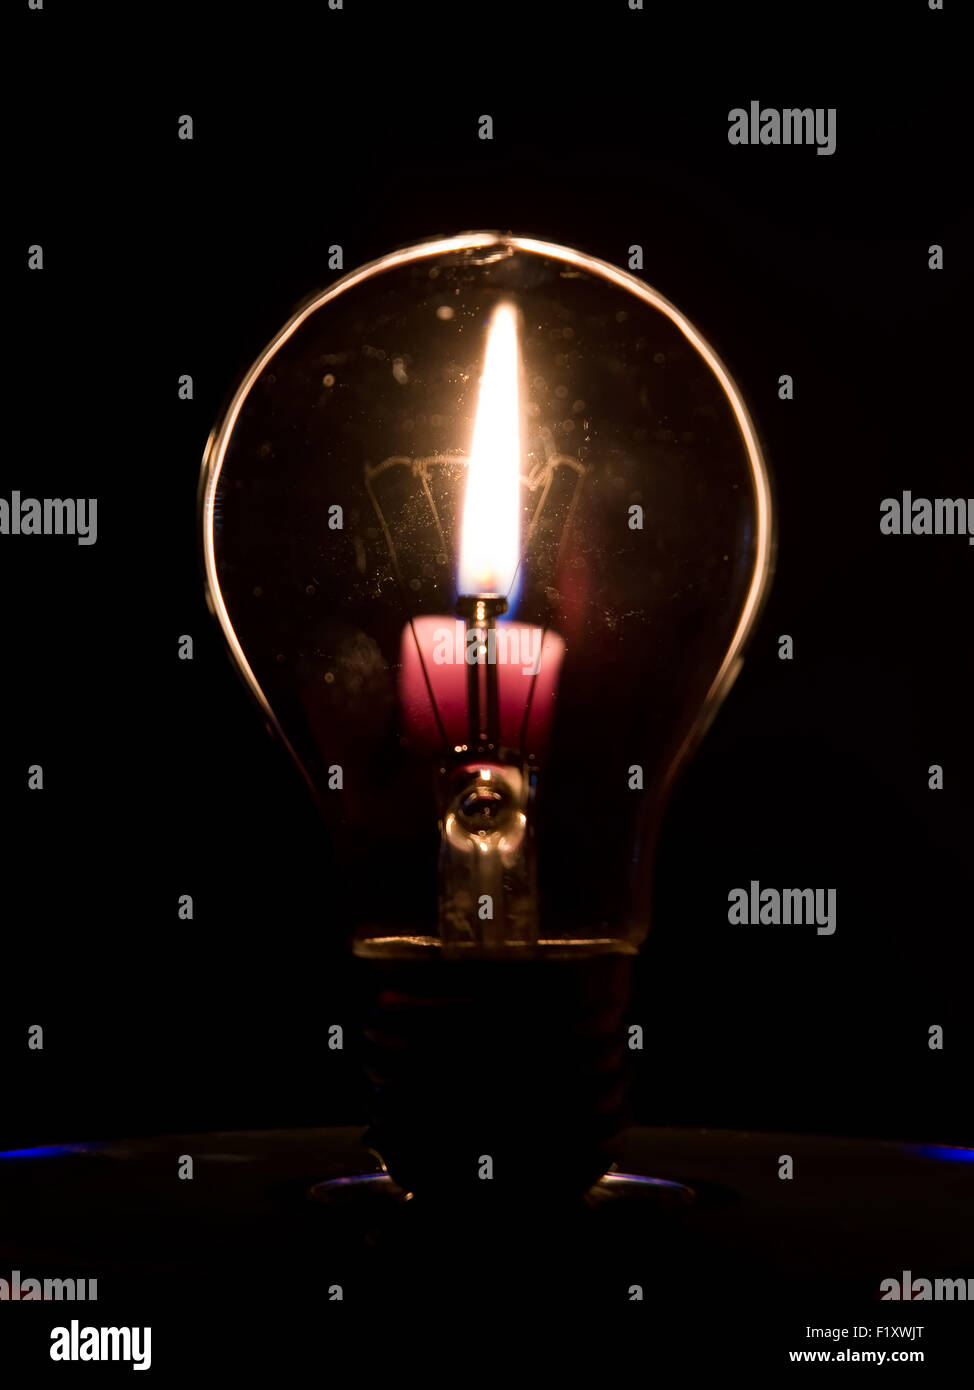 Lightbulb and candle flame Stock Photo